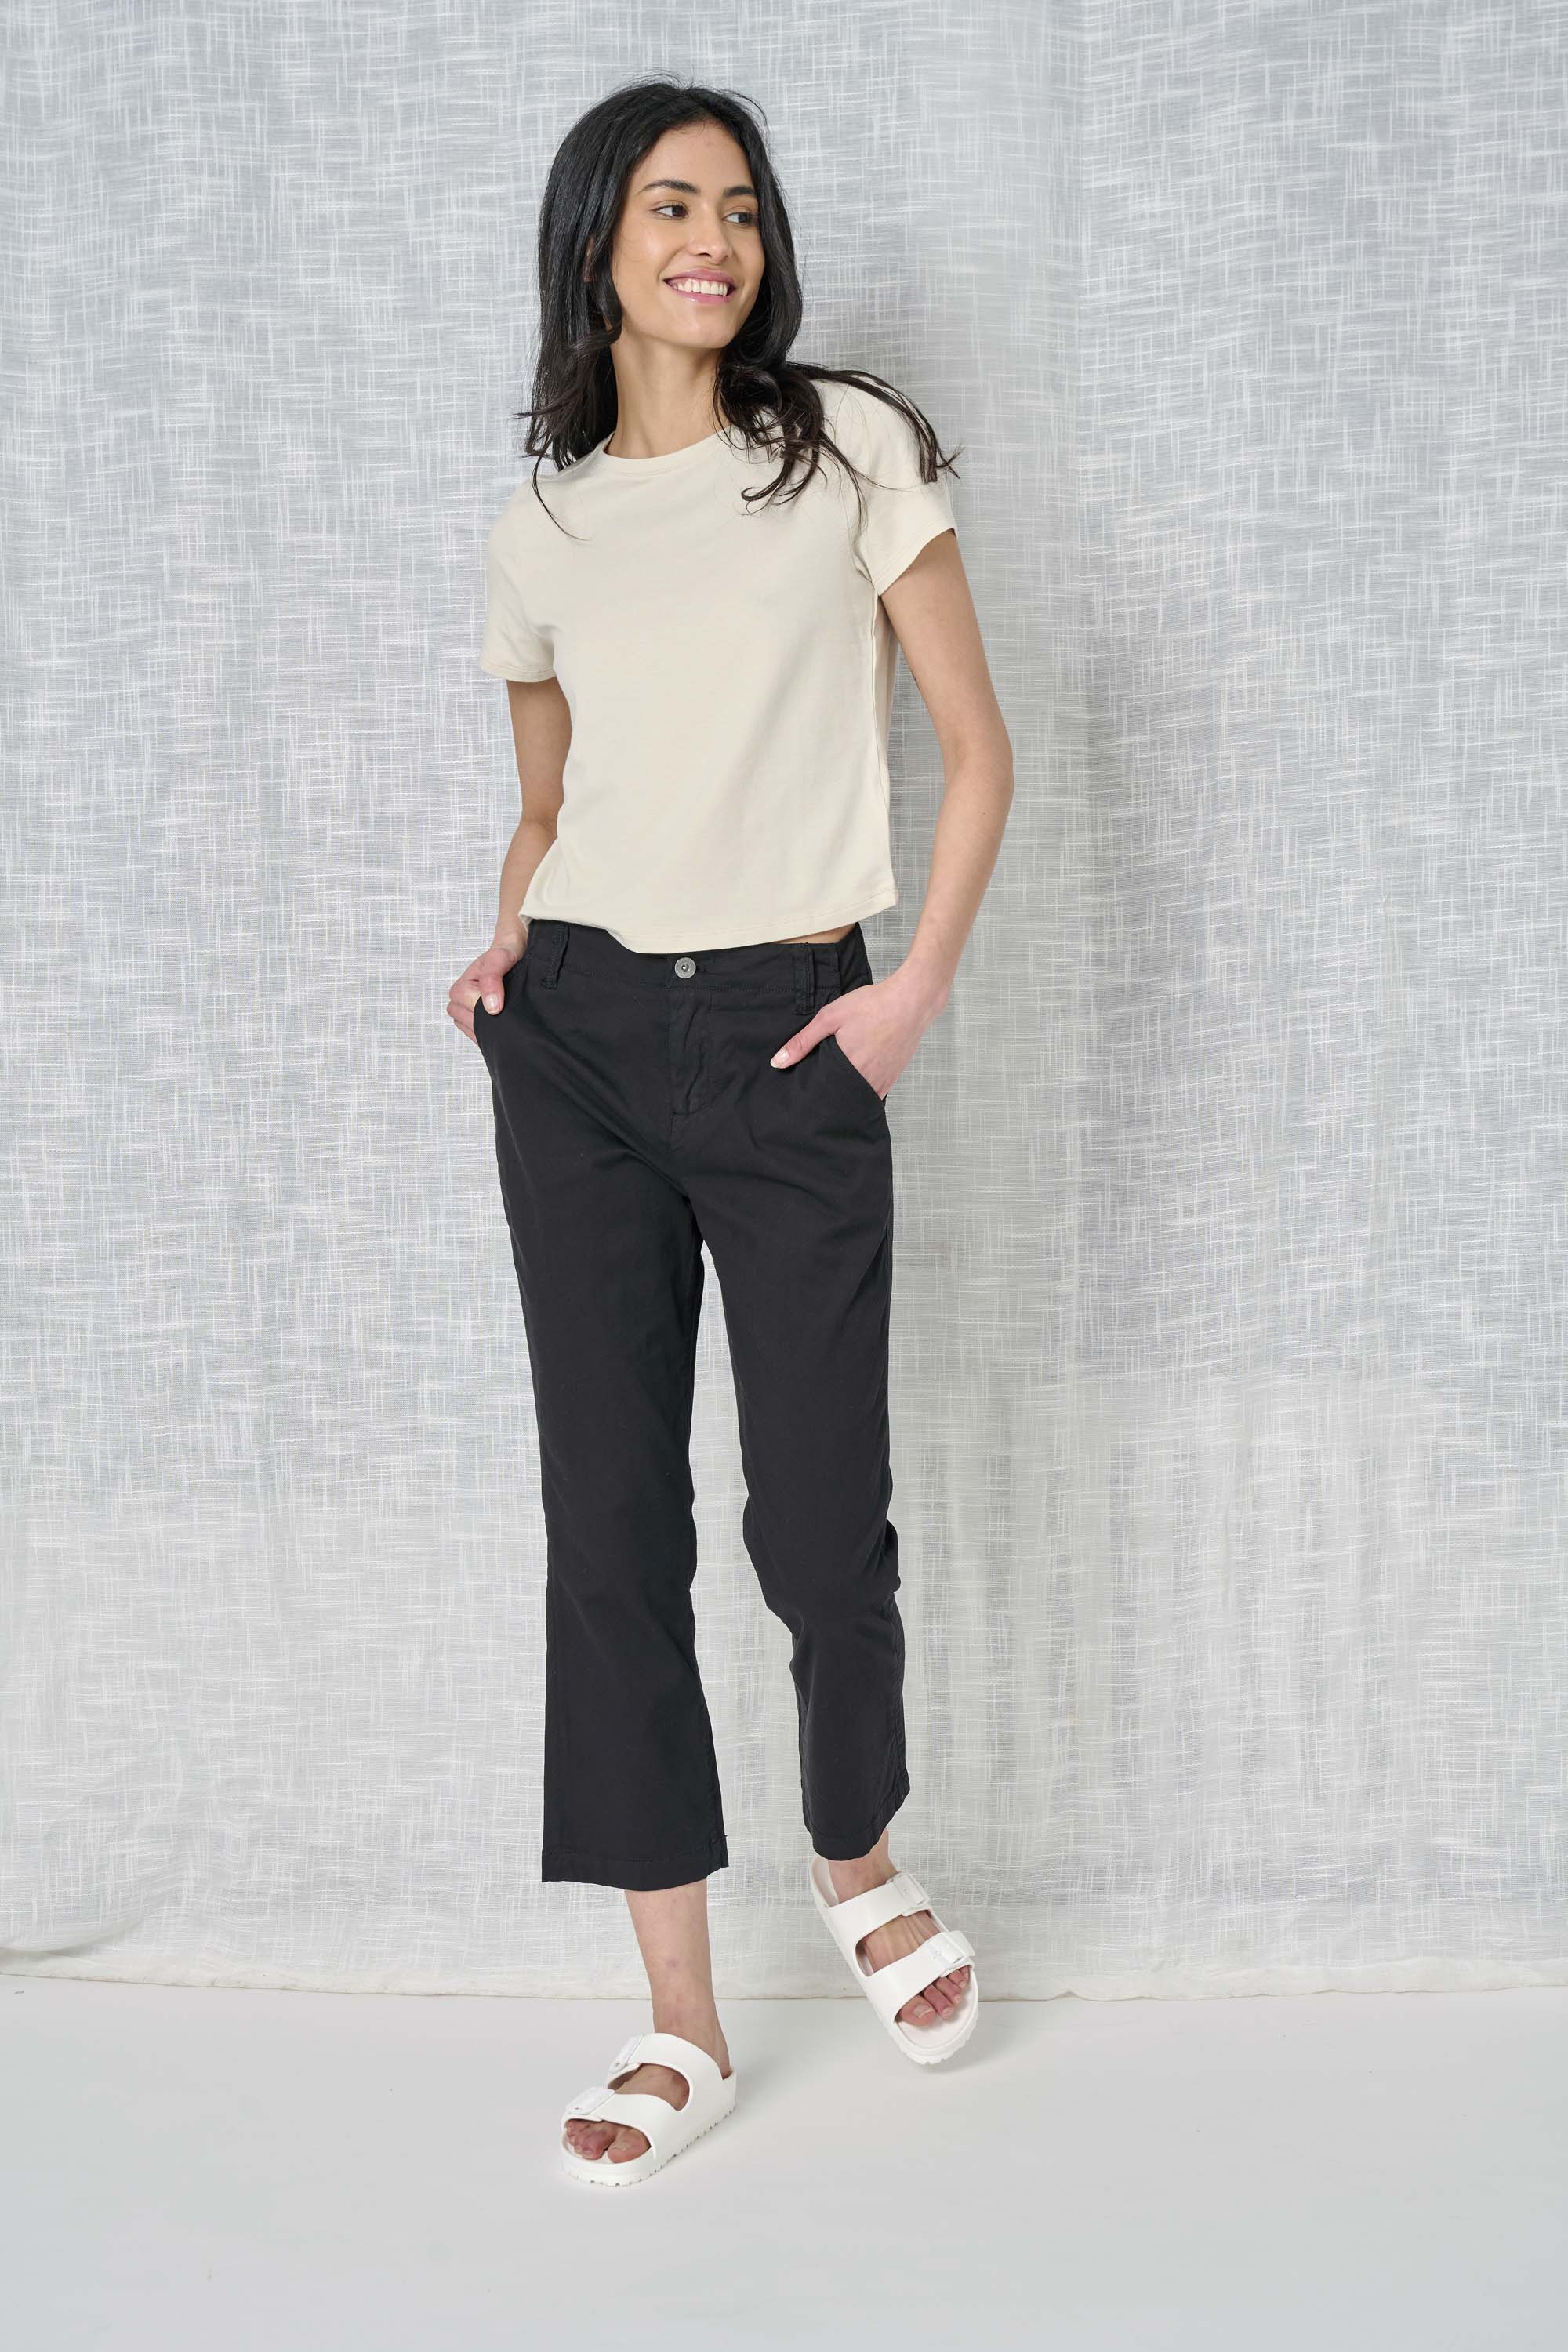 TEXTURED LOUNGE PANT - SOLID GREY – LADY WHITE CO.